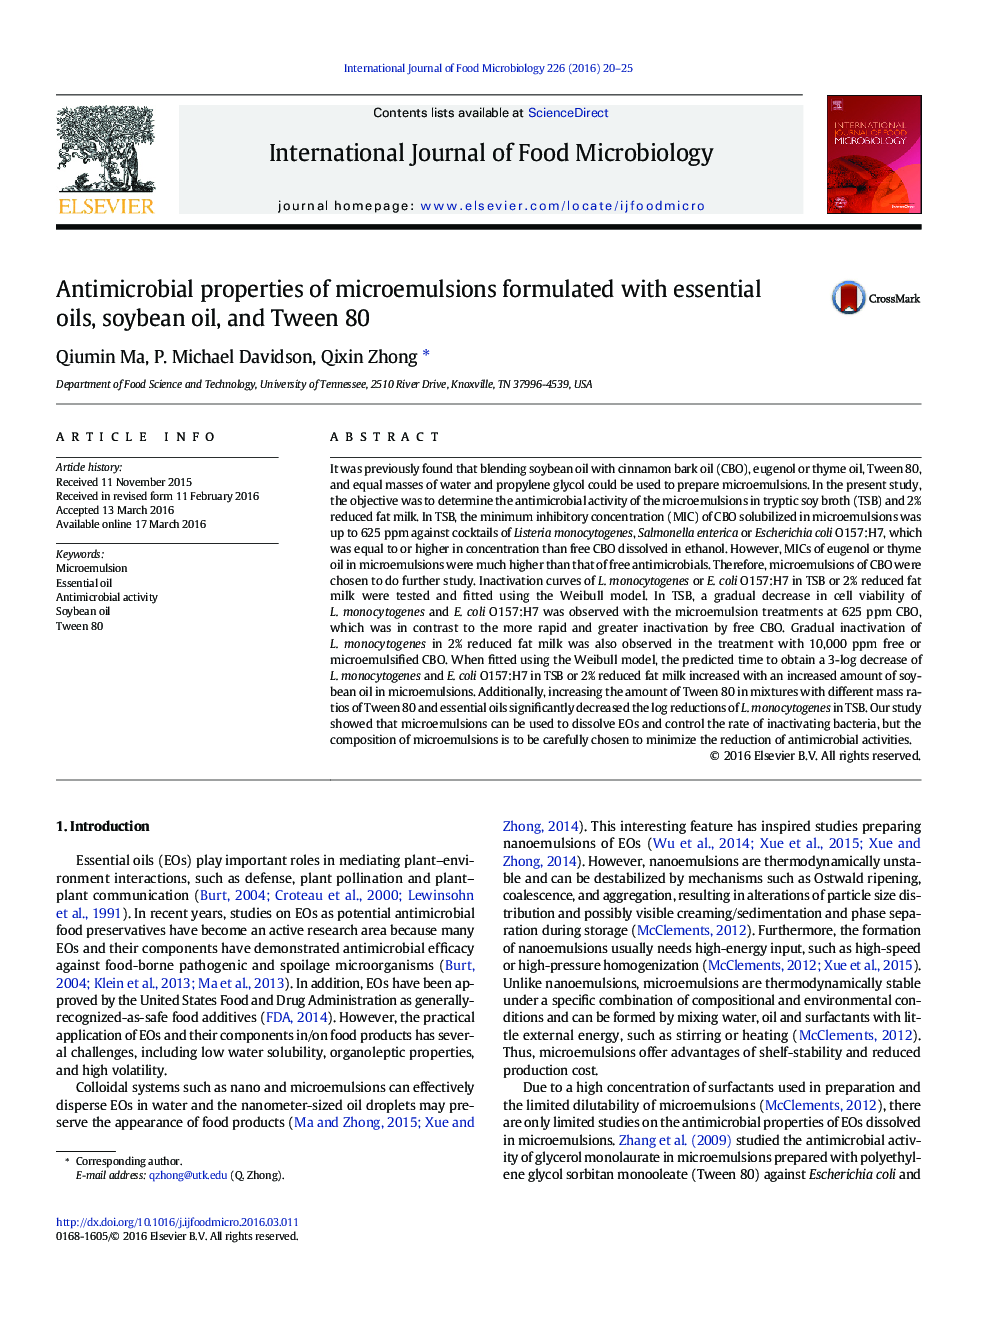 Antimicrobial properties of microemulsions formulated with essential oils, soybean oil, and Tween 80